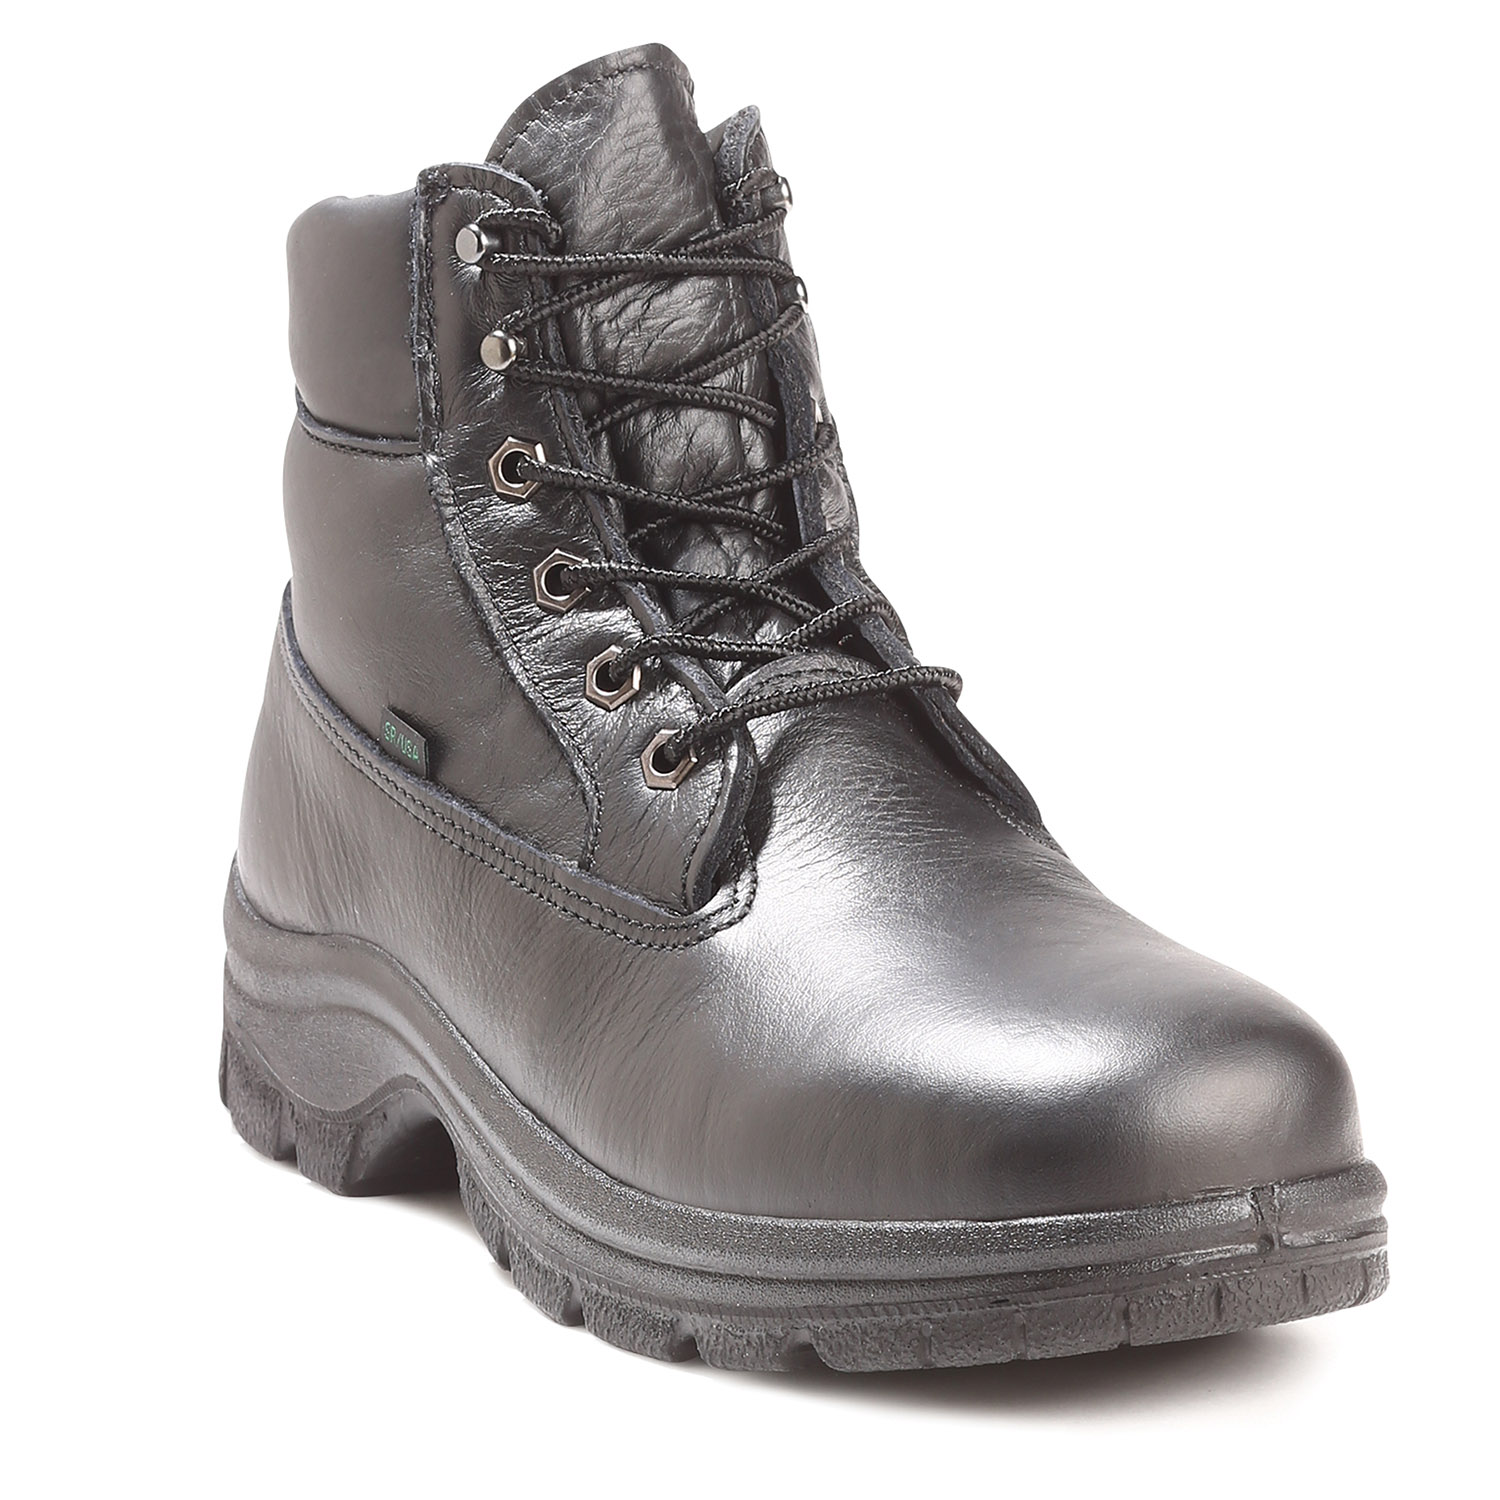 BOOTS 6 WATERPROOF/INSULATED